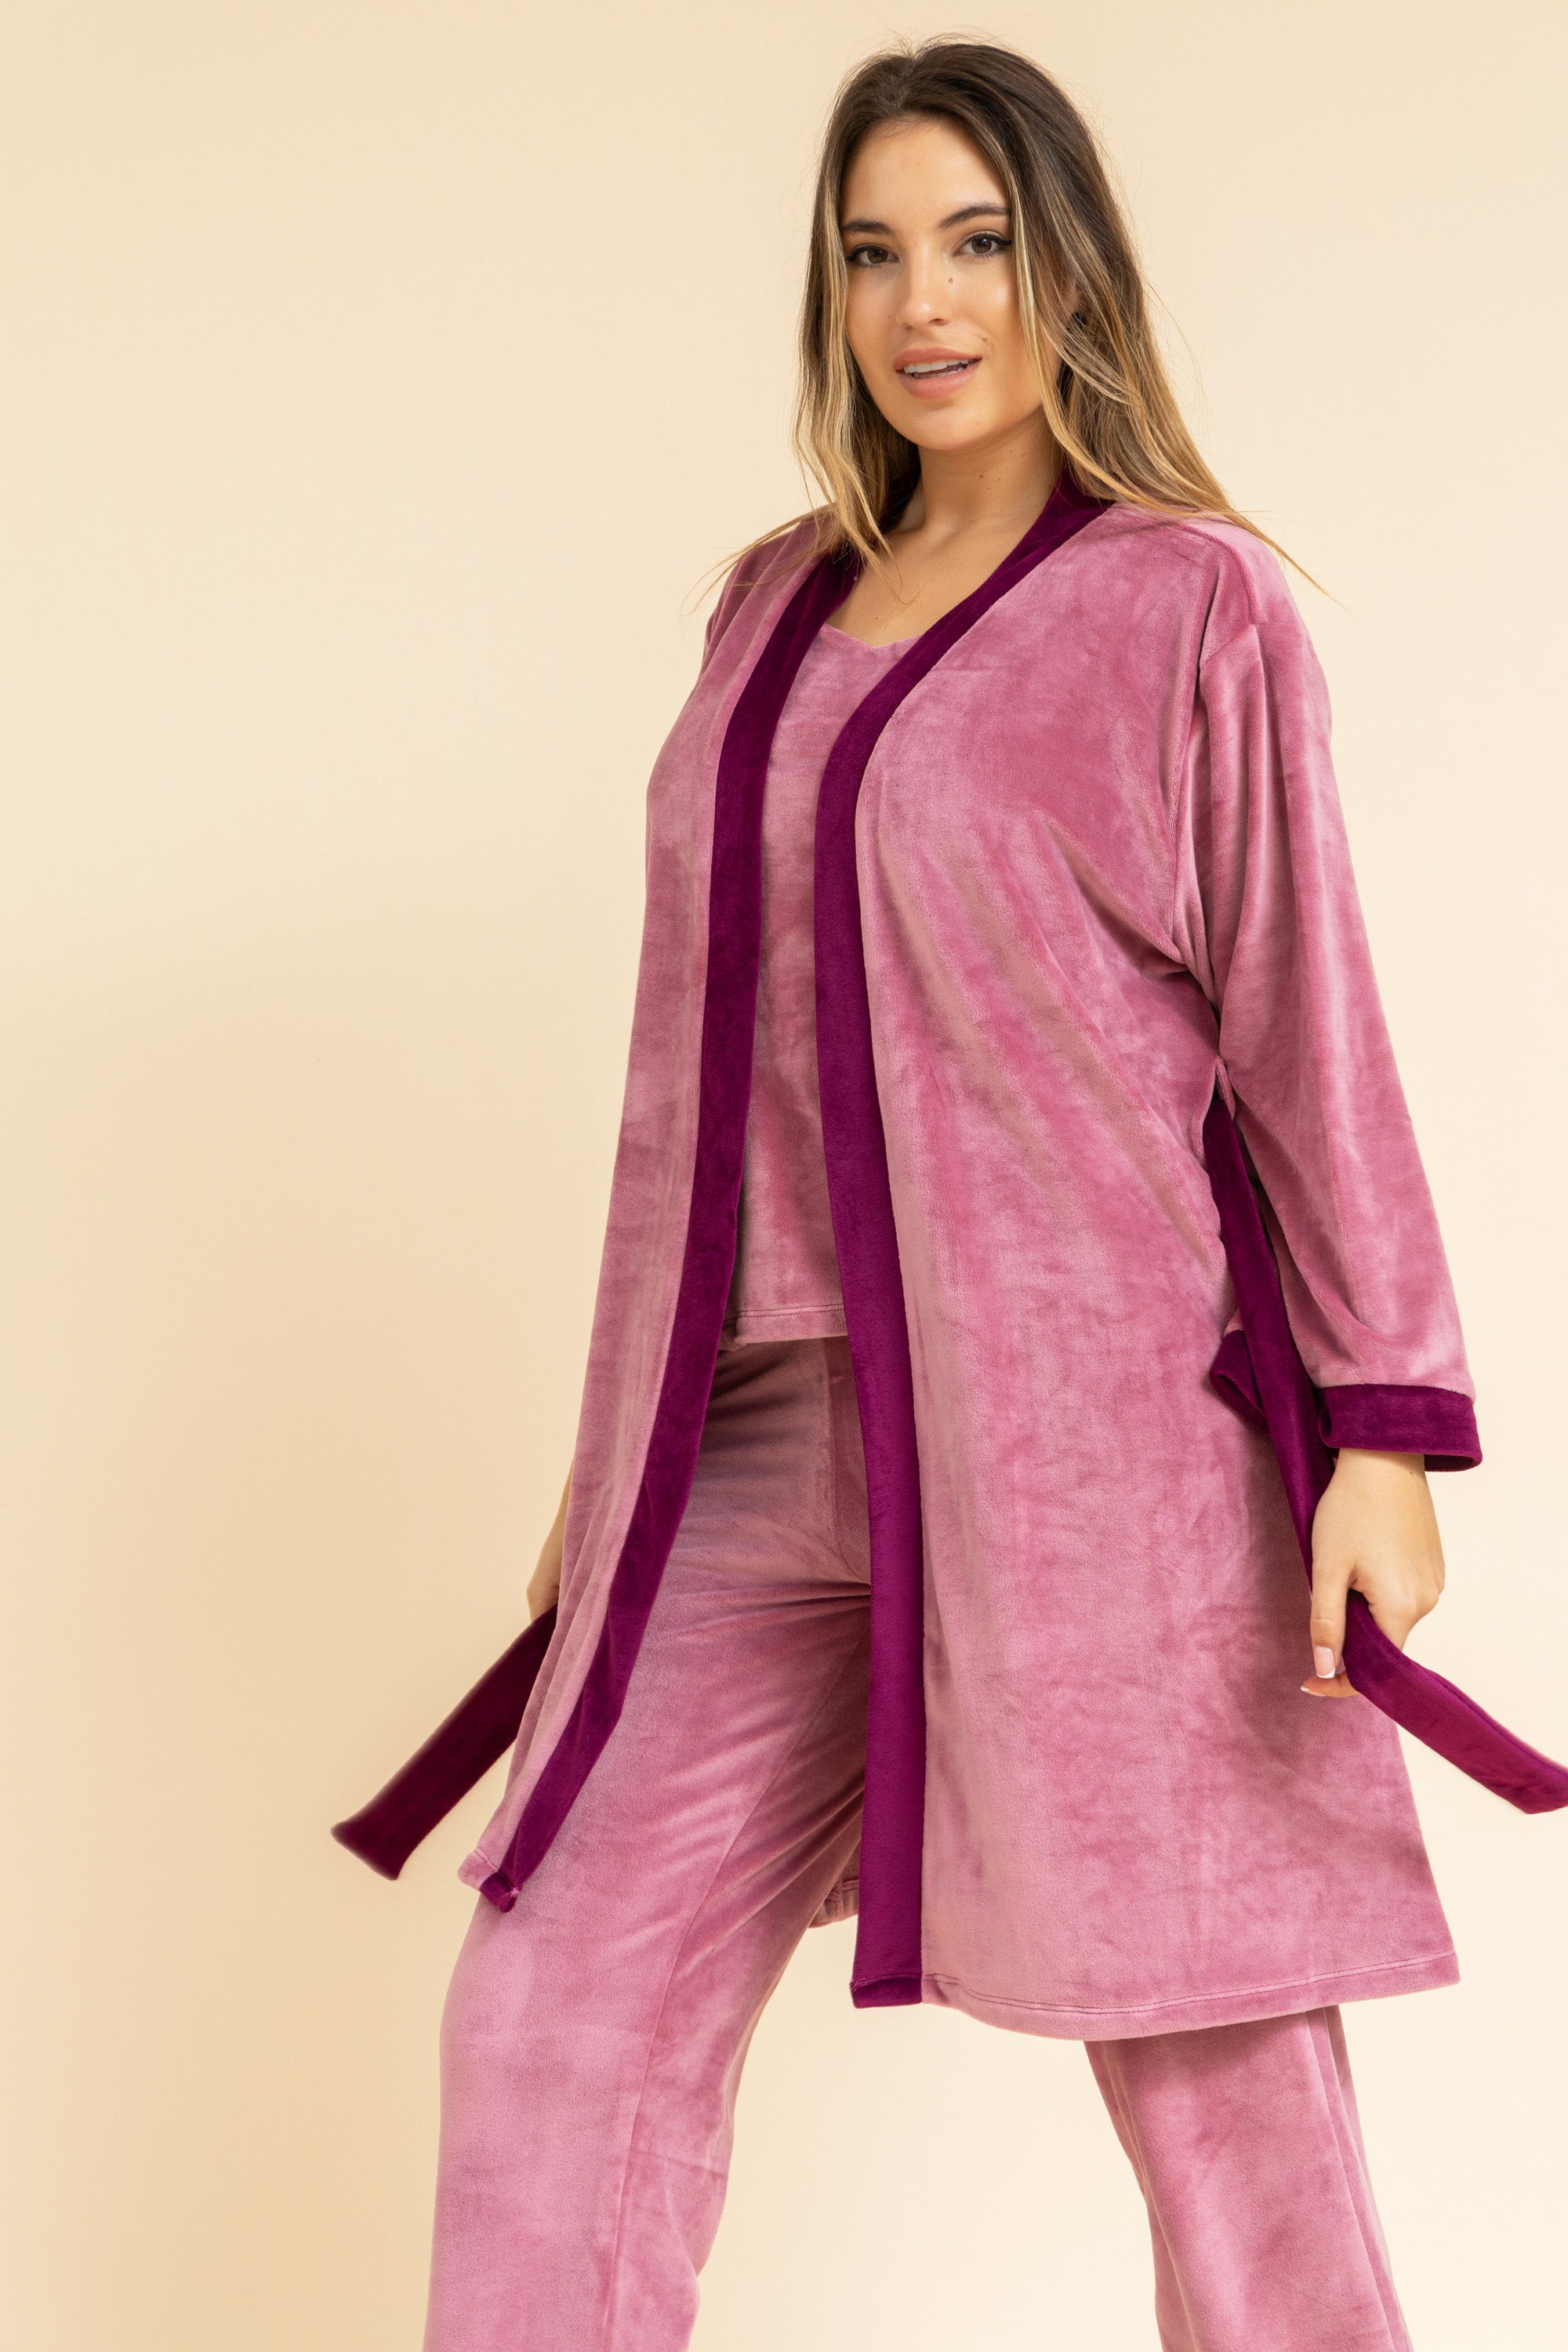 3 Pcs Velvet set - with matching Cami top, Pants and mid length Robe